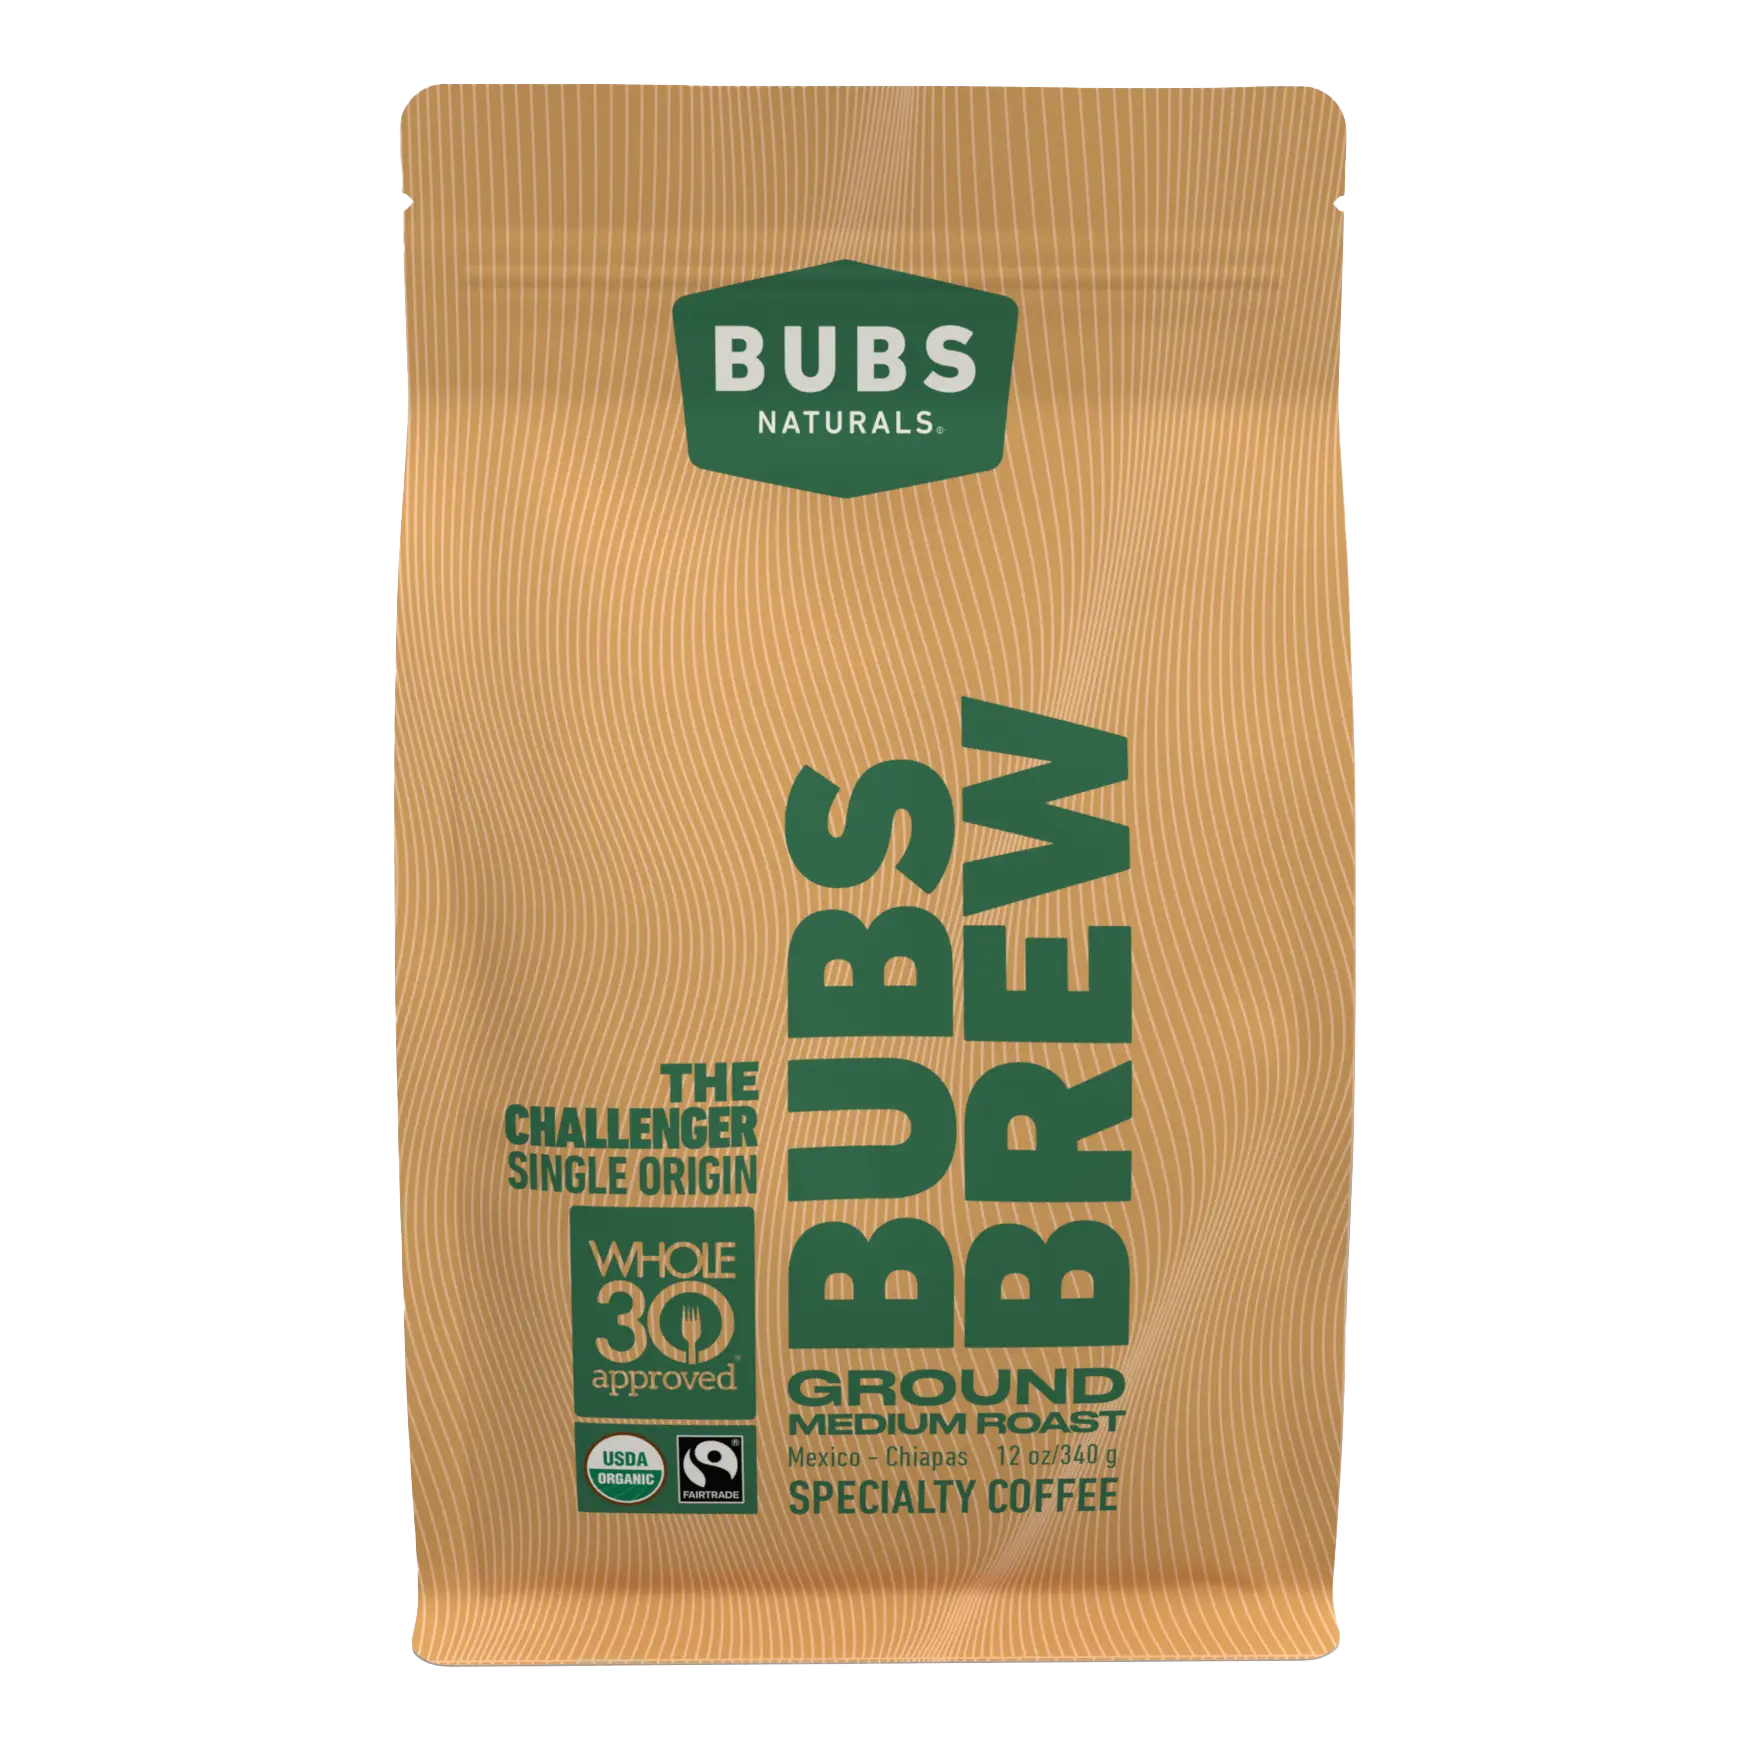 BUBS Naturals Mix Wand - Handheld Milk Frother - Lattes, Coffee,  Cappuccino, Frappes, Hot Chocolate Blender - Portable Protein Powder,  Omelet, Egg